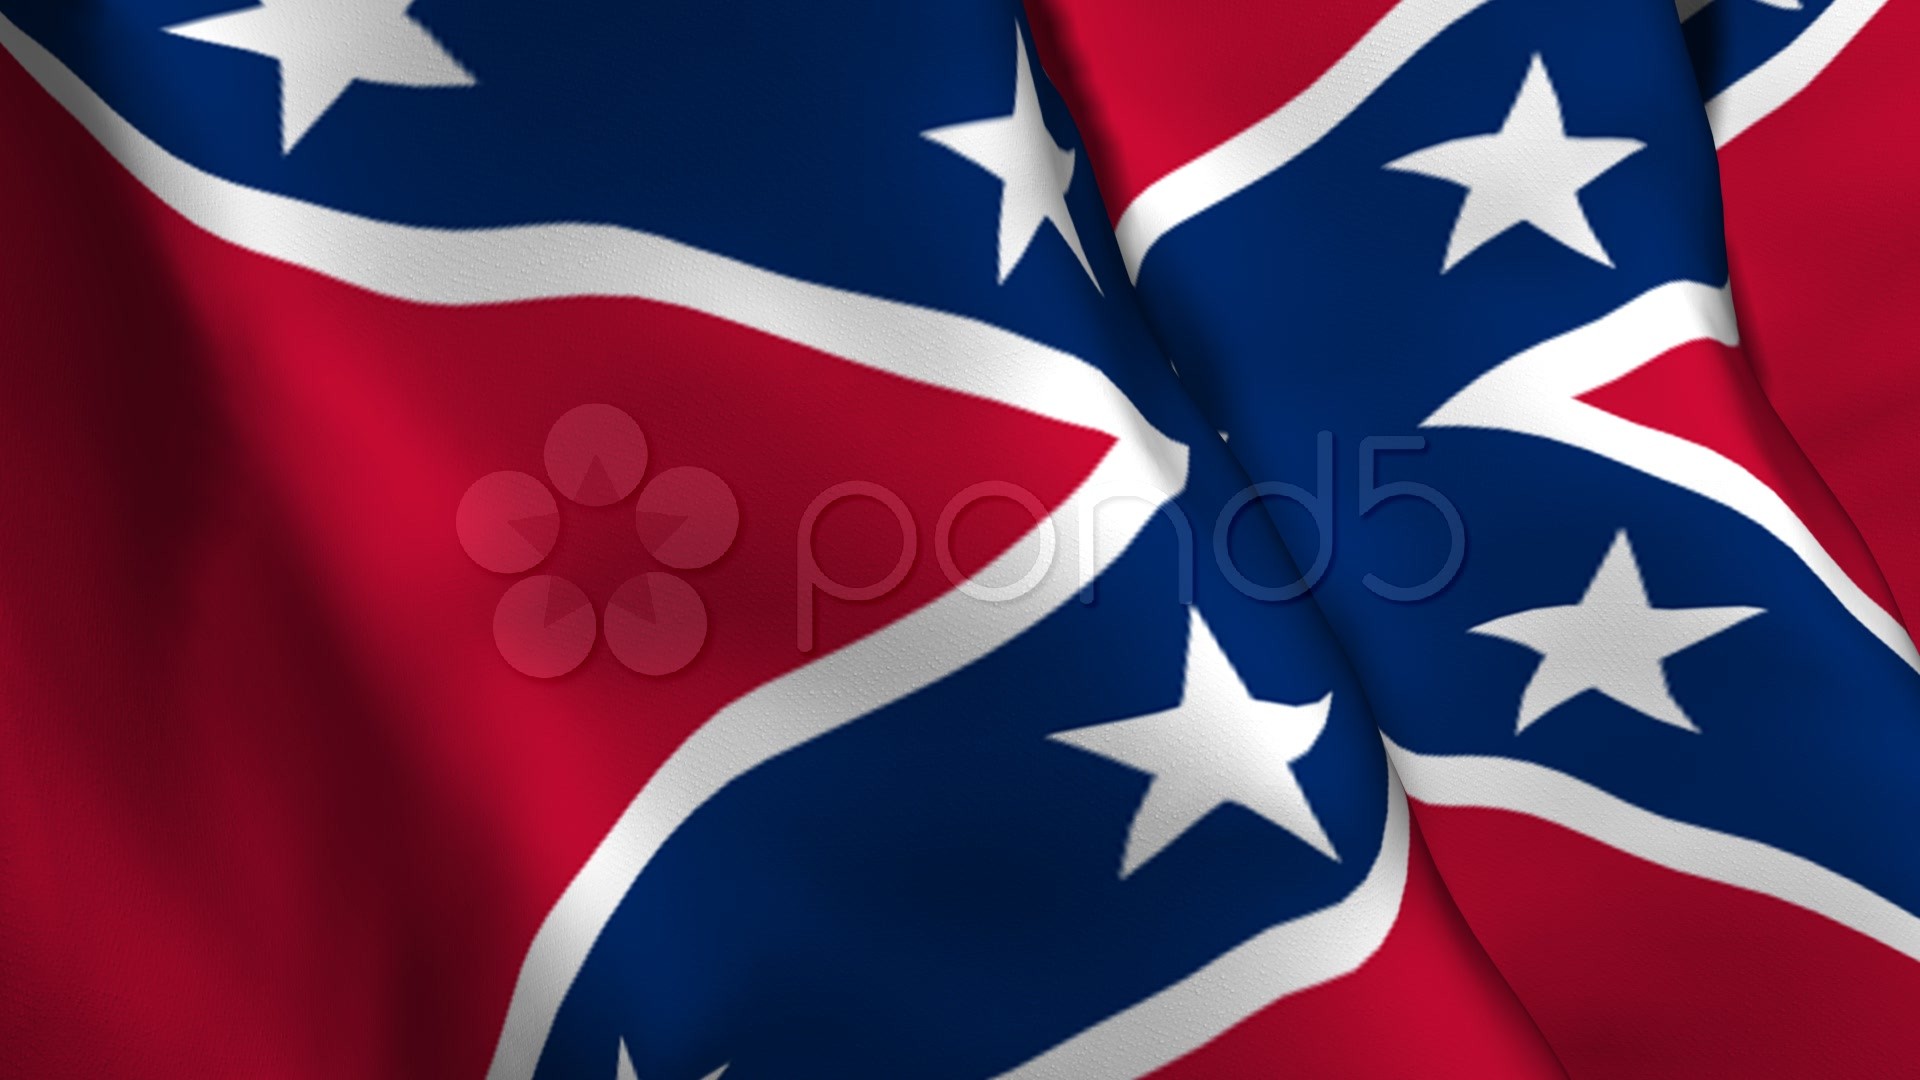 1920x1080 Animated Confederate Flag - Bing images